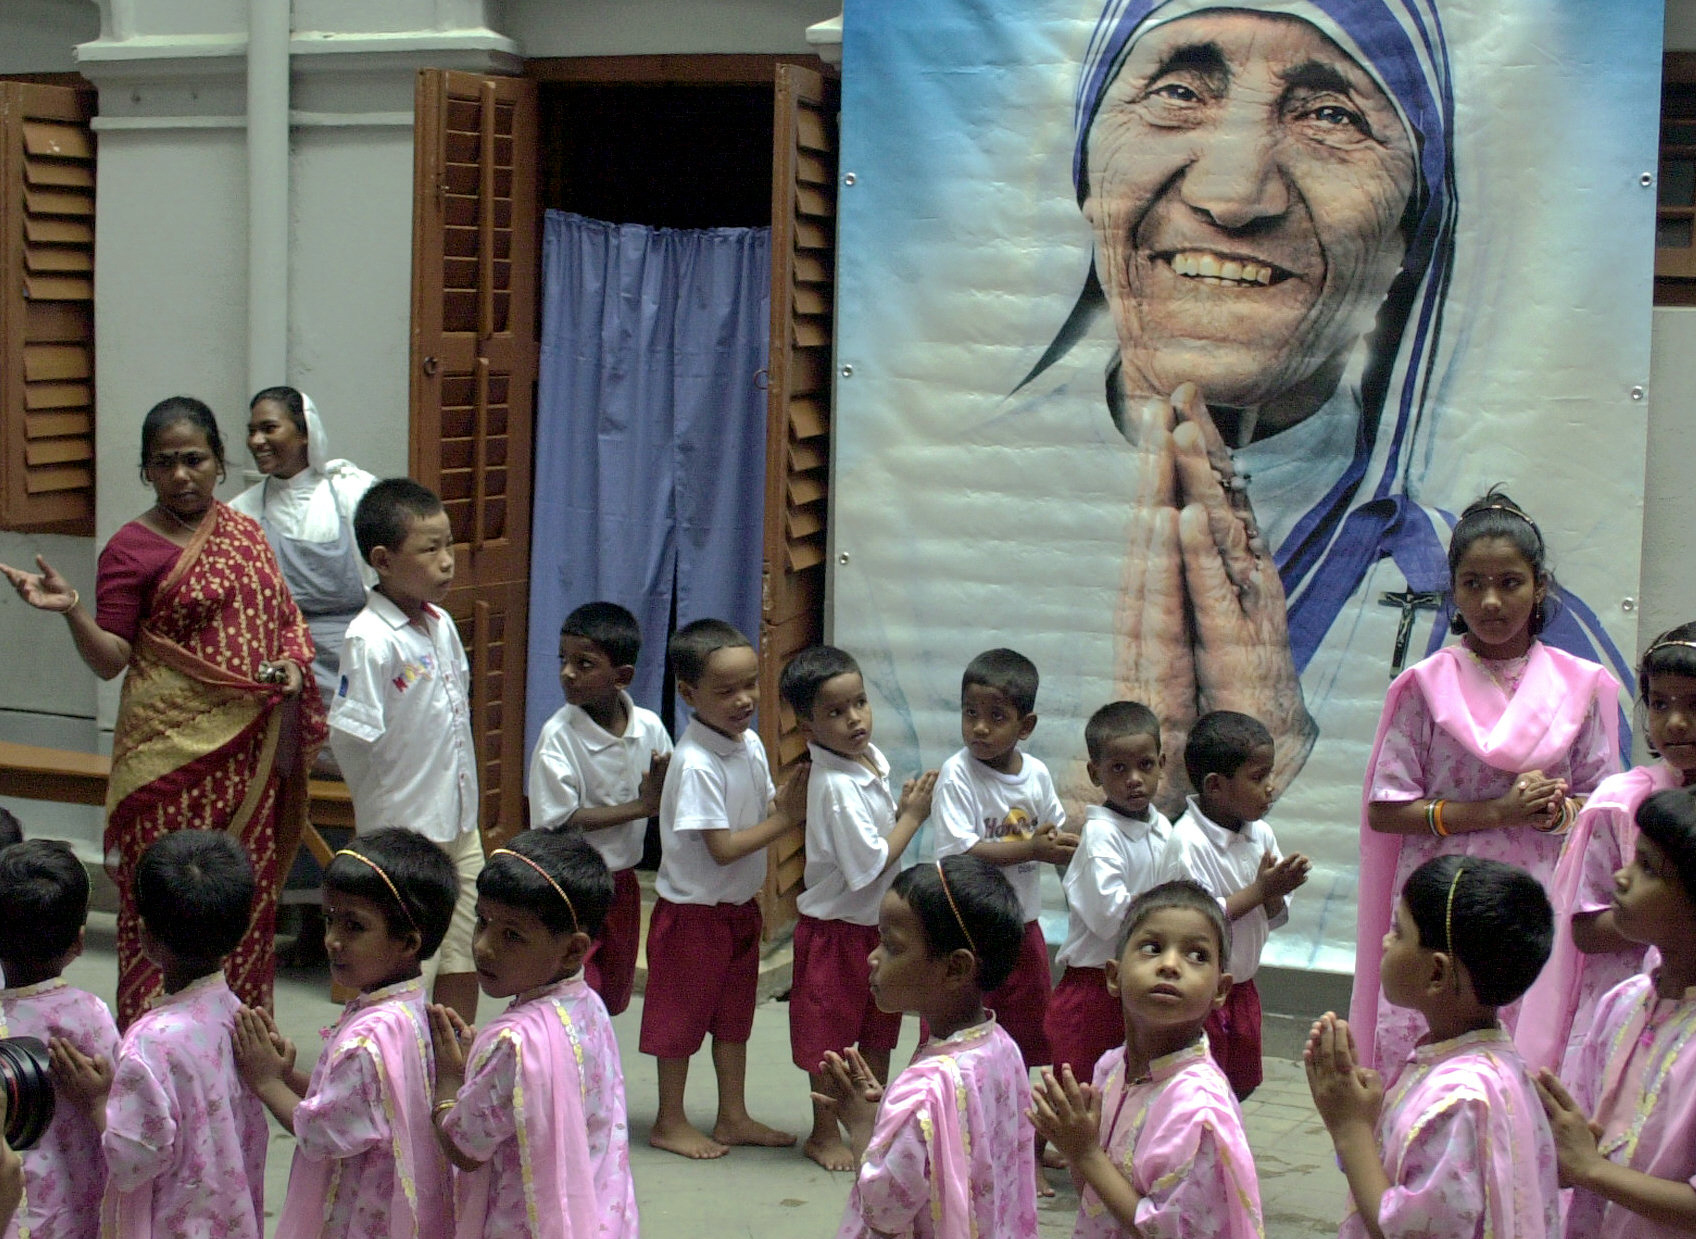 A group of Indian orphans along with a nun of the Missionaries of Charity offer prayers in front of a portrait of Mother Teresa during prayers to observe the seventh anniversary of her death in Calcutta, Sept. 5, 2004.